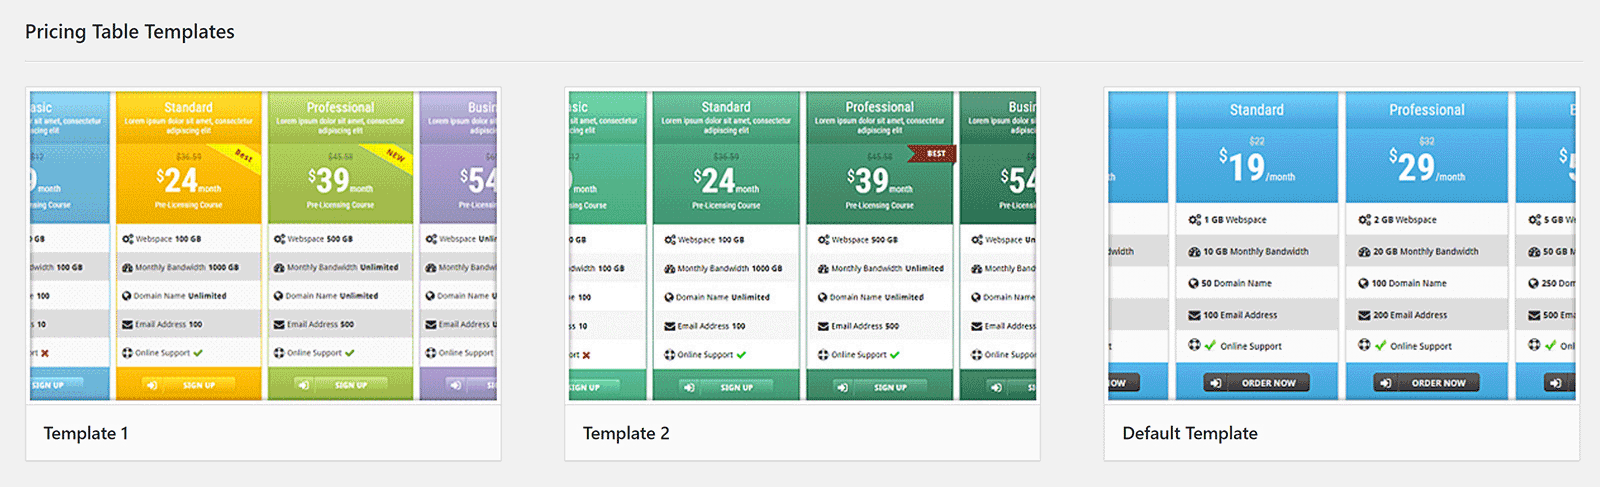 WRC Pricing Tables Templates